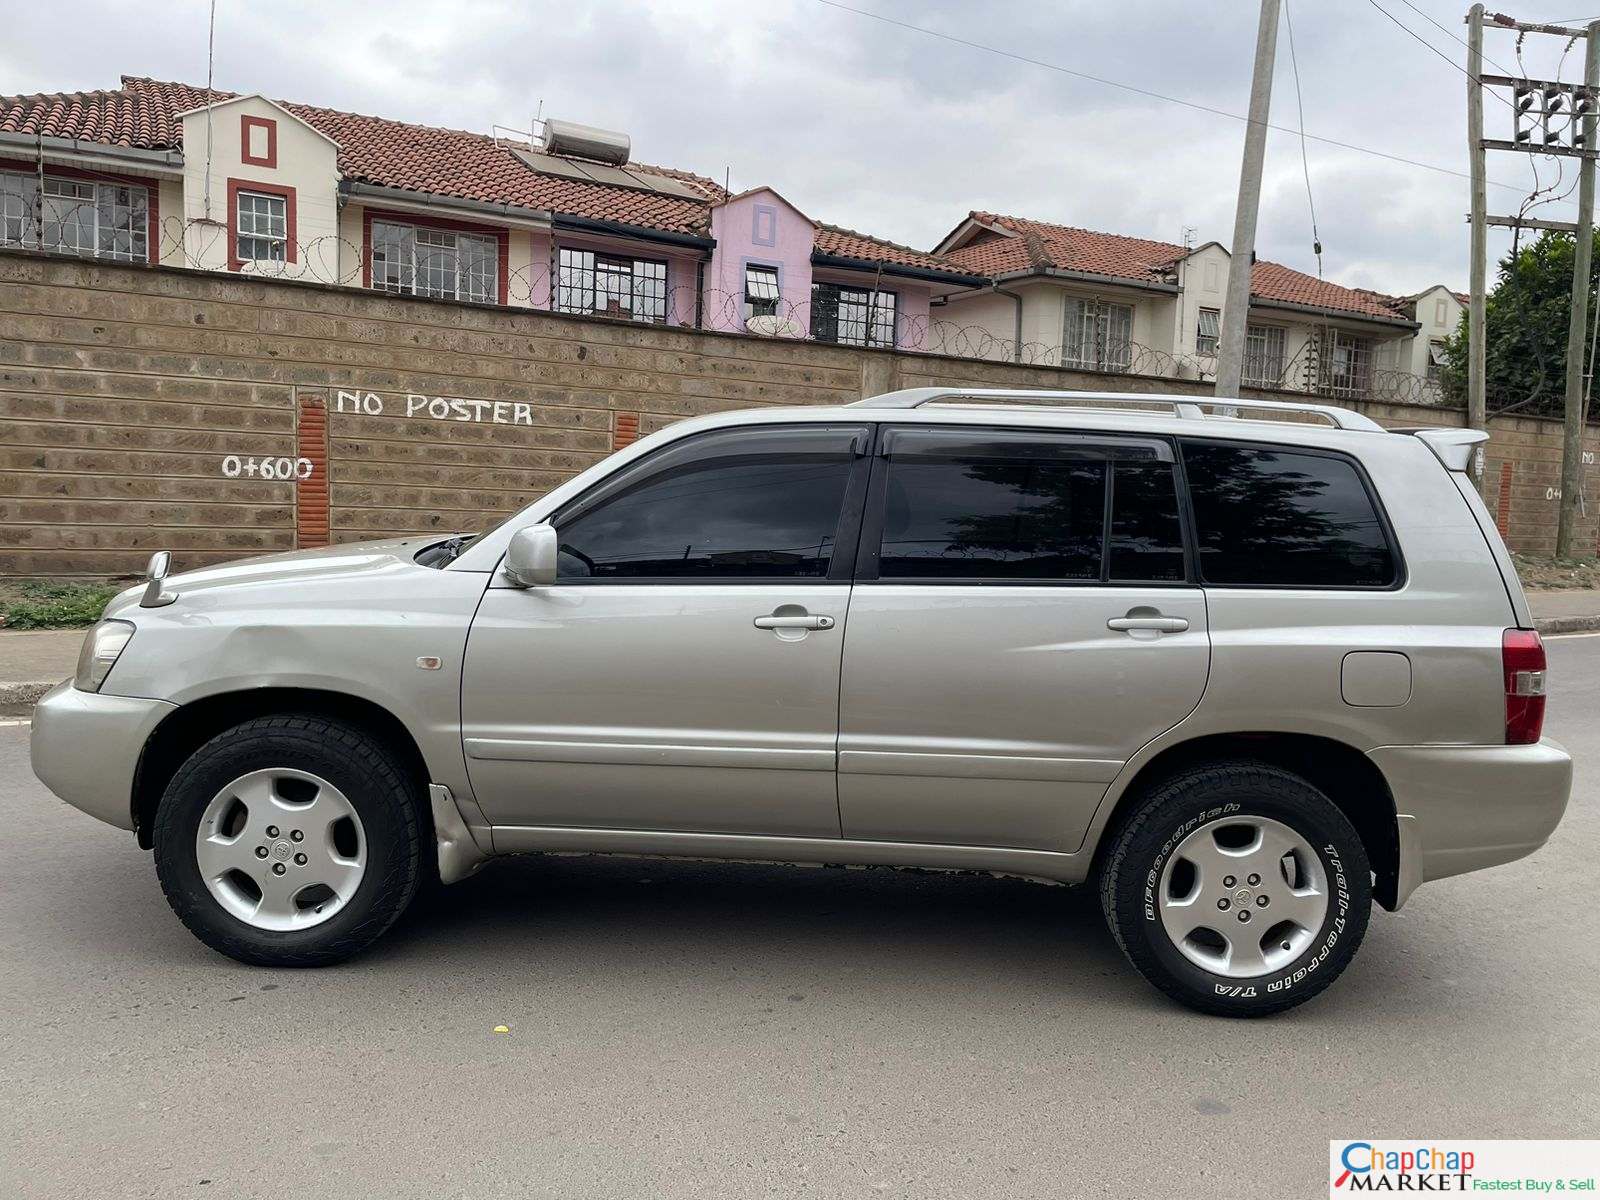 Toyota KLUGER for sale in Kenya ðŸ”¥ QUICK You pay 70% Deposit INSTALLMENTS Trade in Ok EXCLUSIVE!